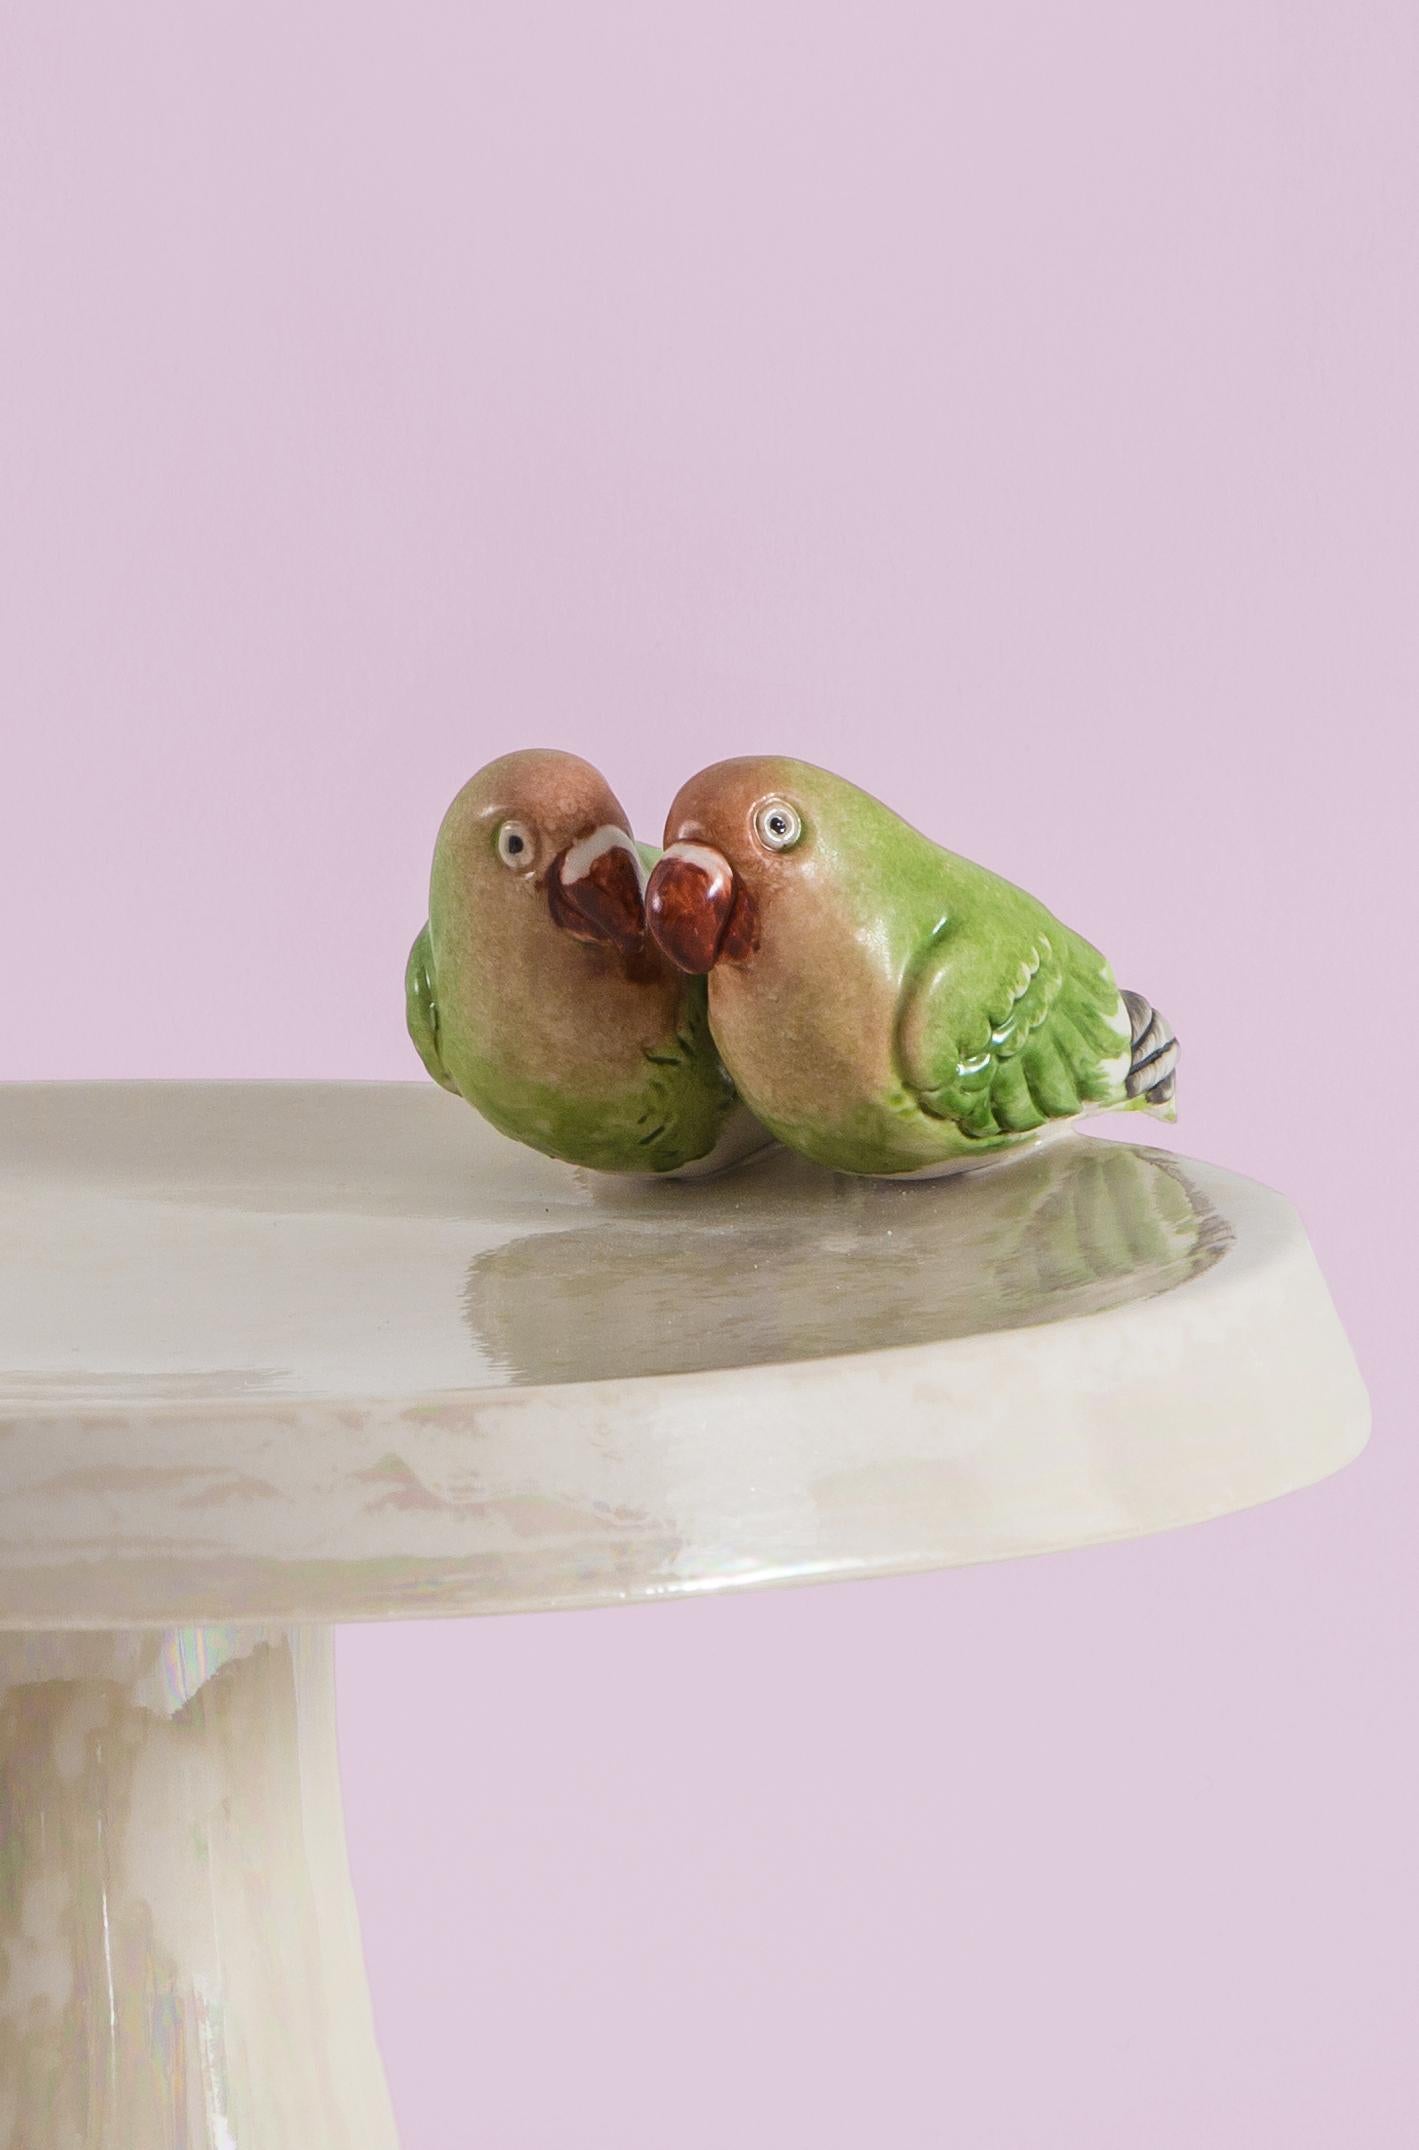 This Italian porcelain sculpture is part of Grand Tour by Vito Nesta. Made in Capodimonte porcelain with a glossy and iridescent finish. This cake stand is embellished by two inseparable parrots painted by hand.